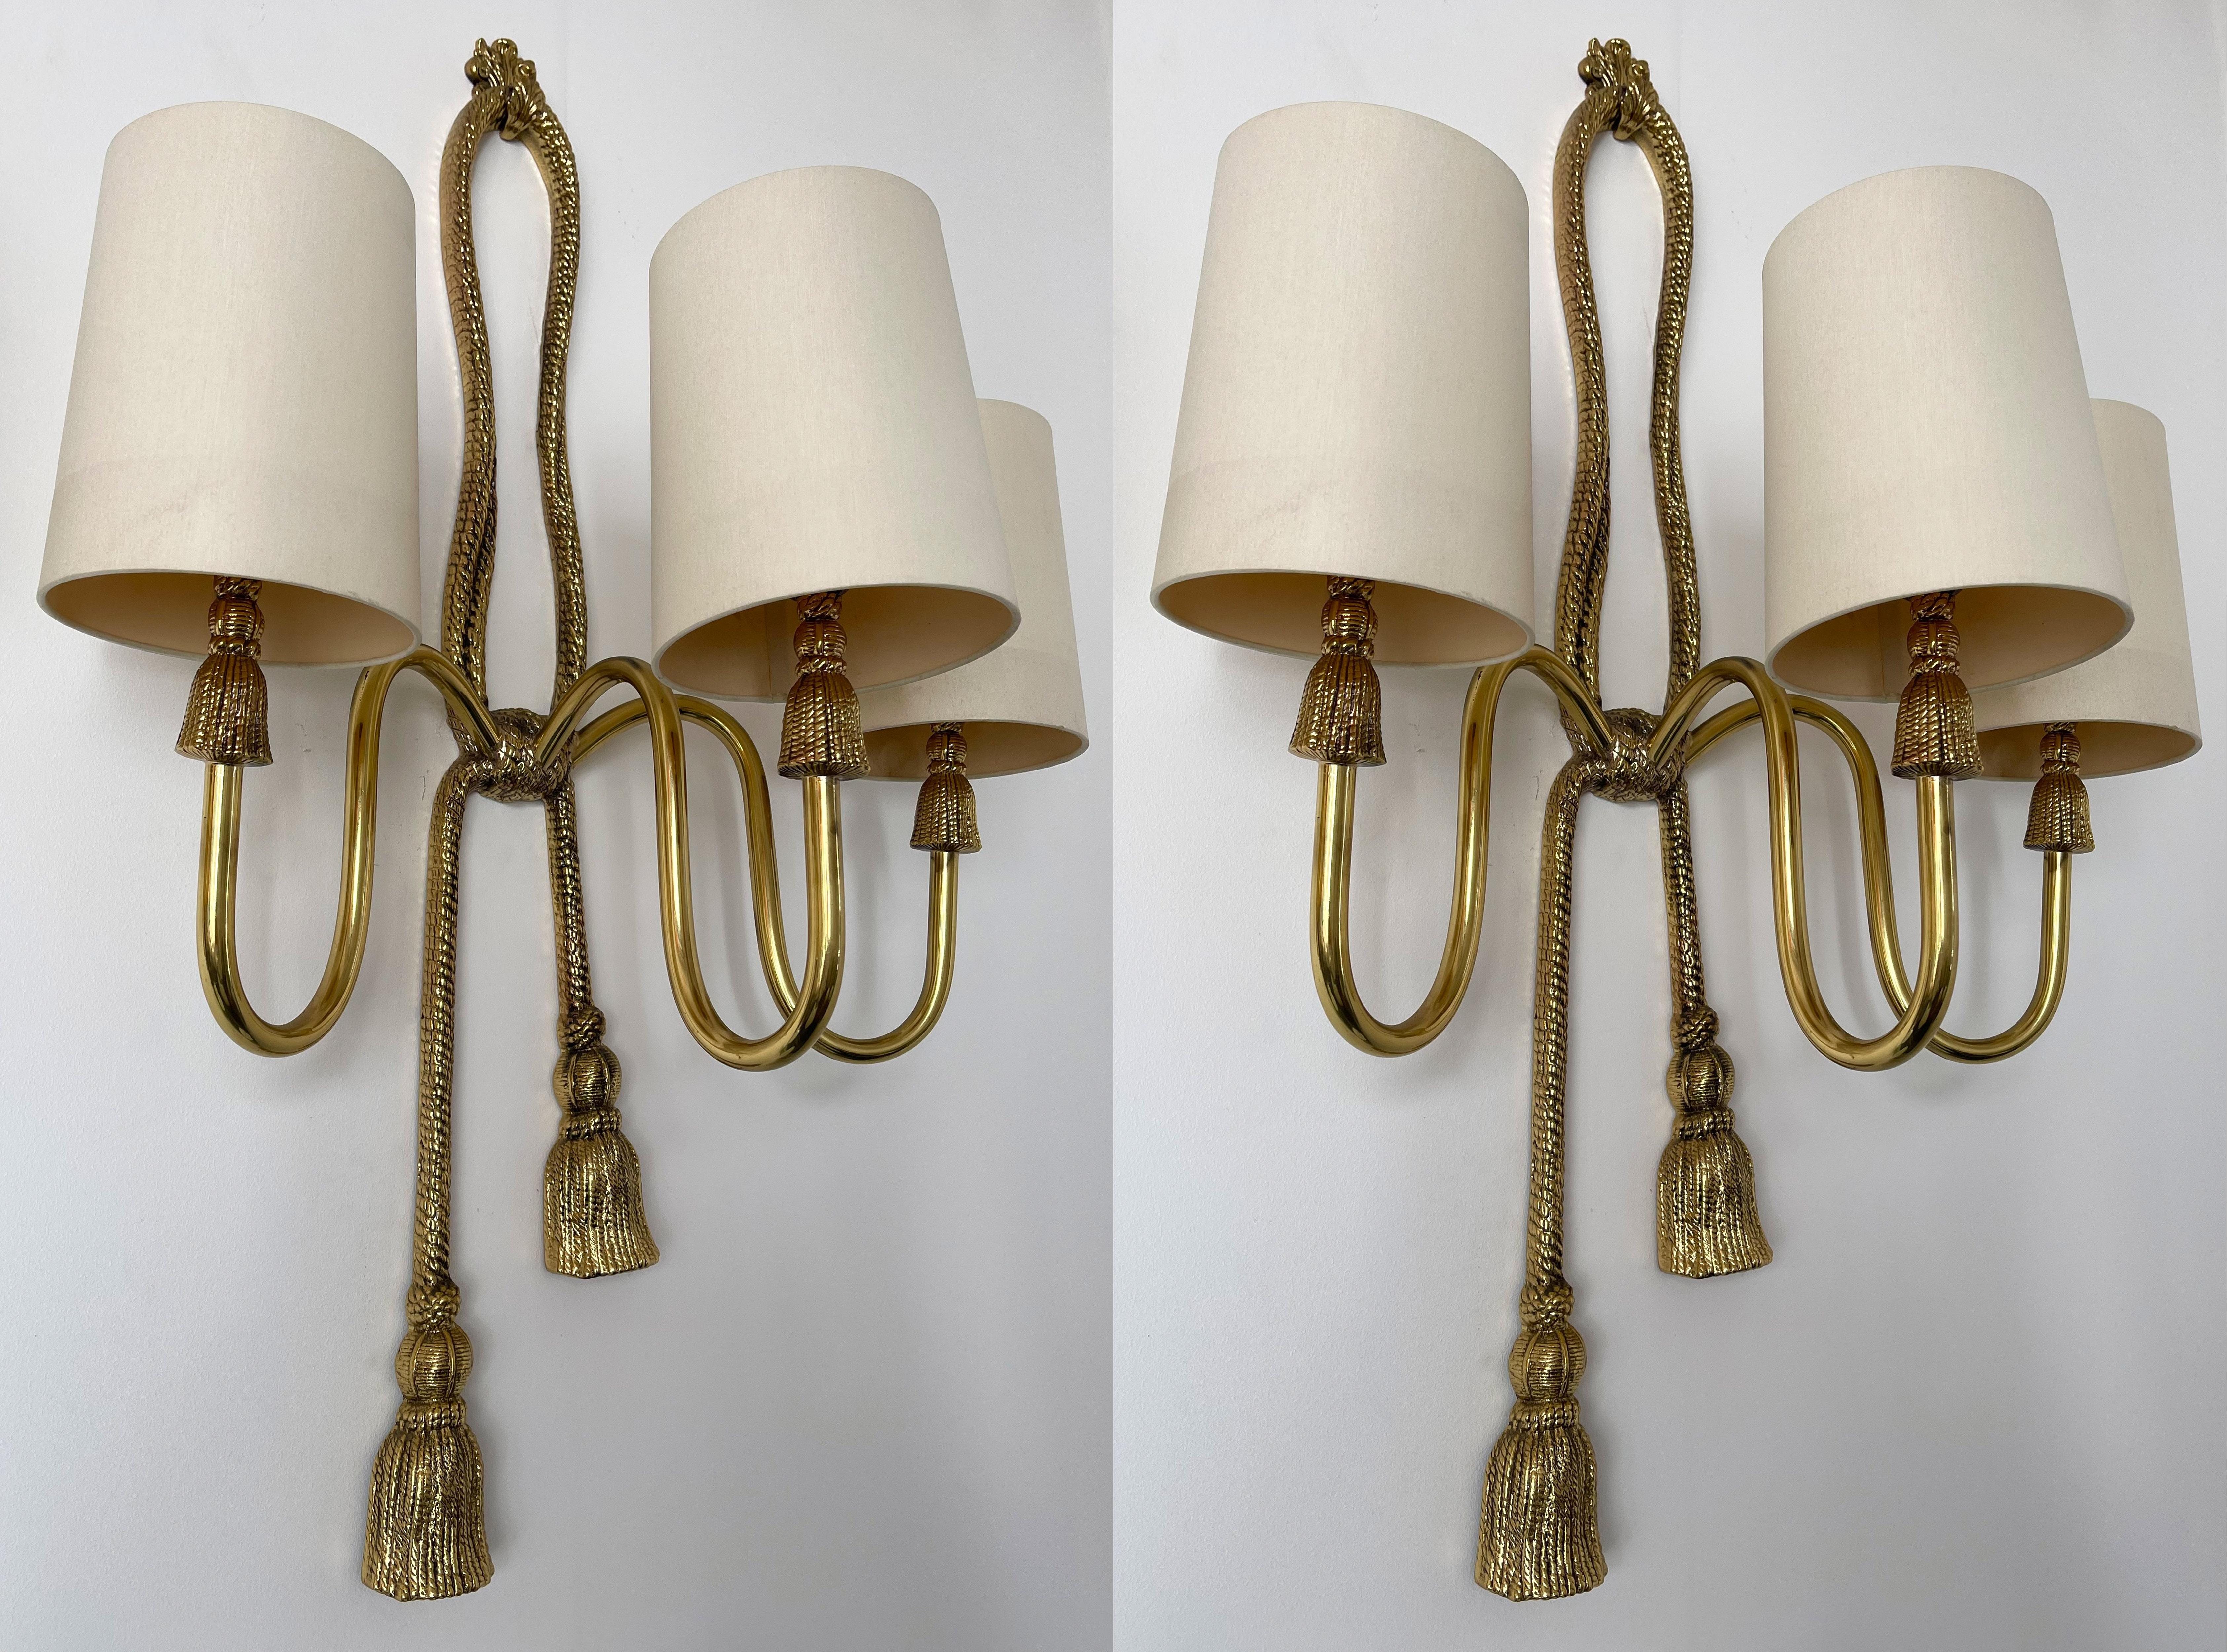 Pair of Gilt Bronze and Brass Knot Sconces by Valenti. Spain, 1980s For Sale 1